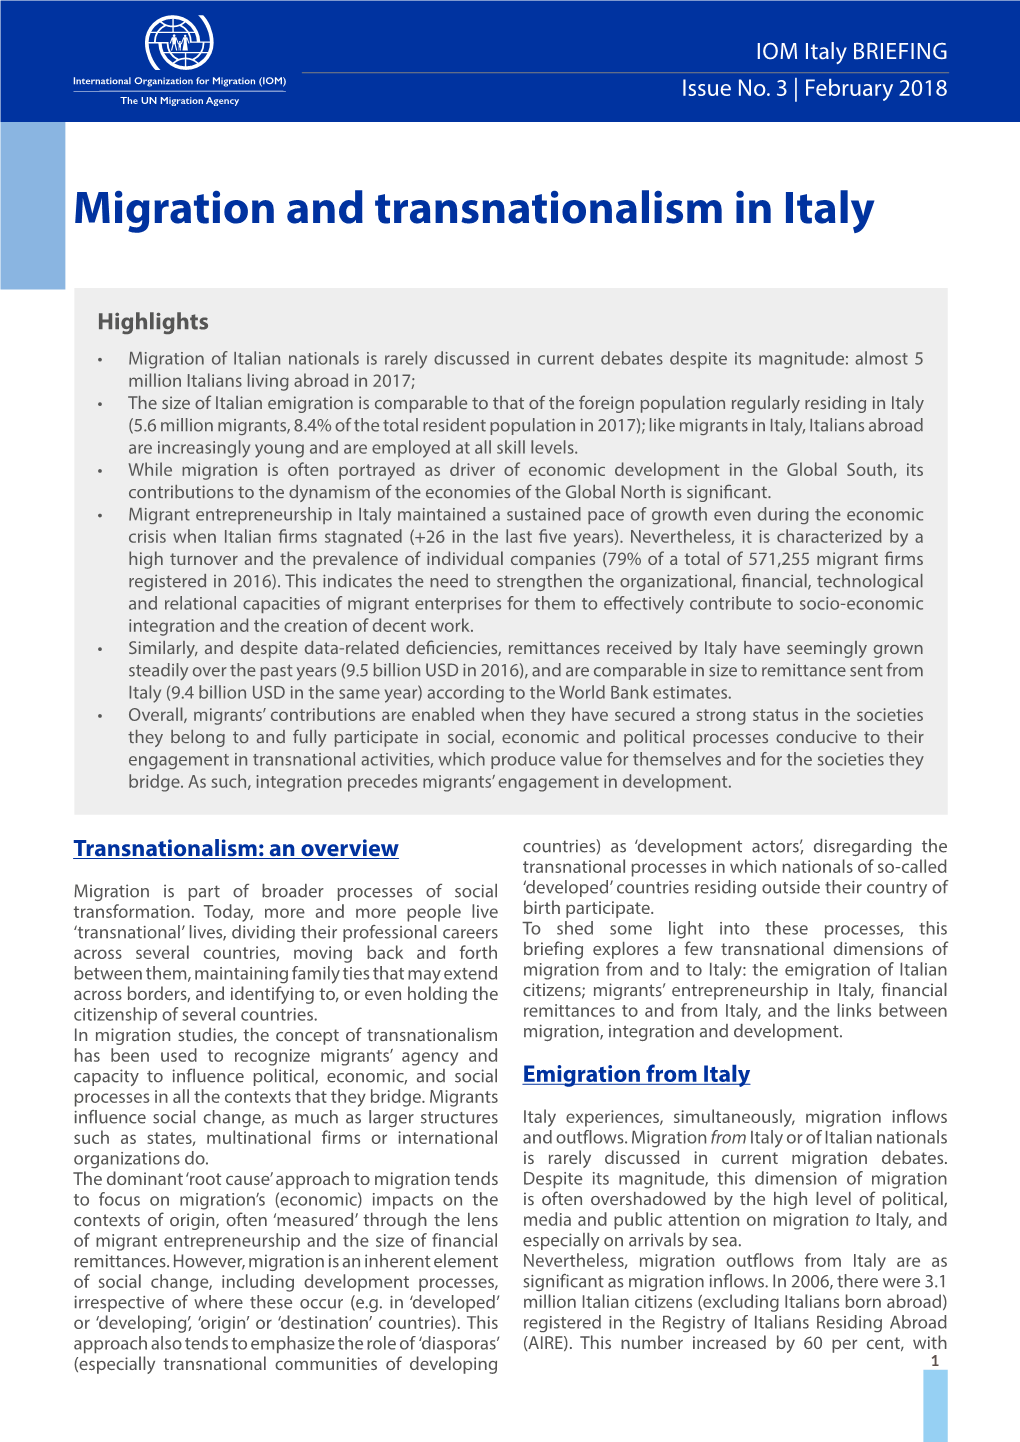 Migration and Transnationalism in Italy